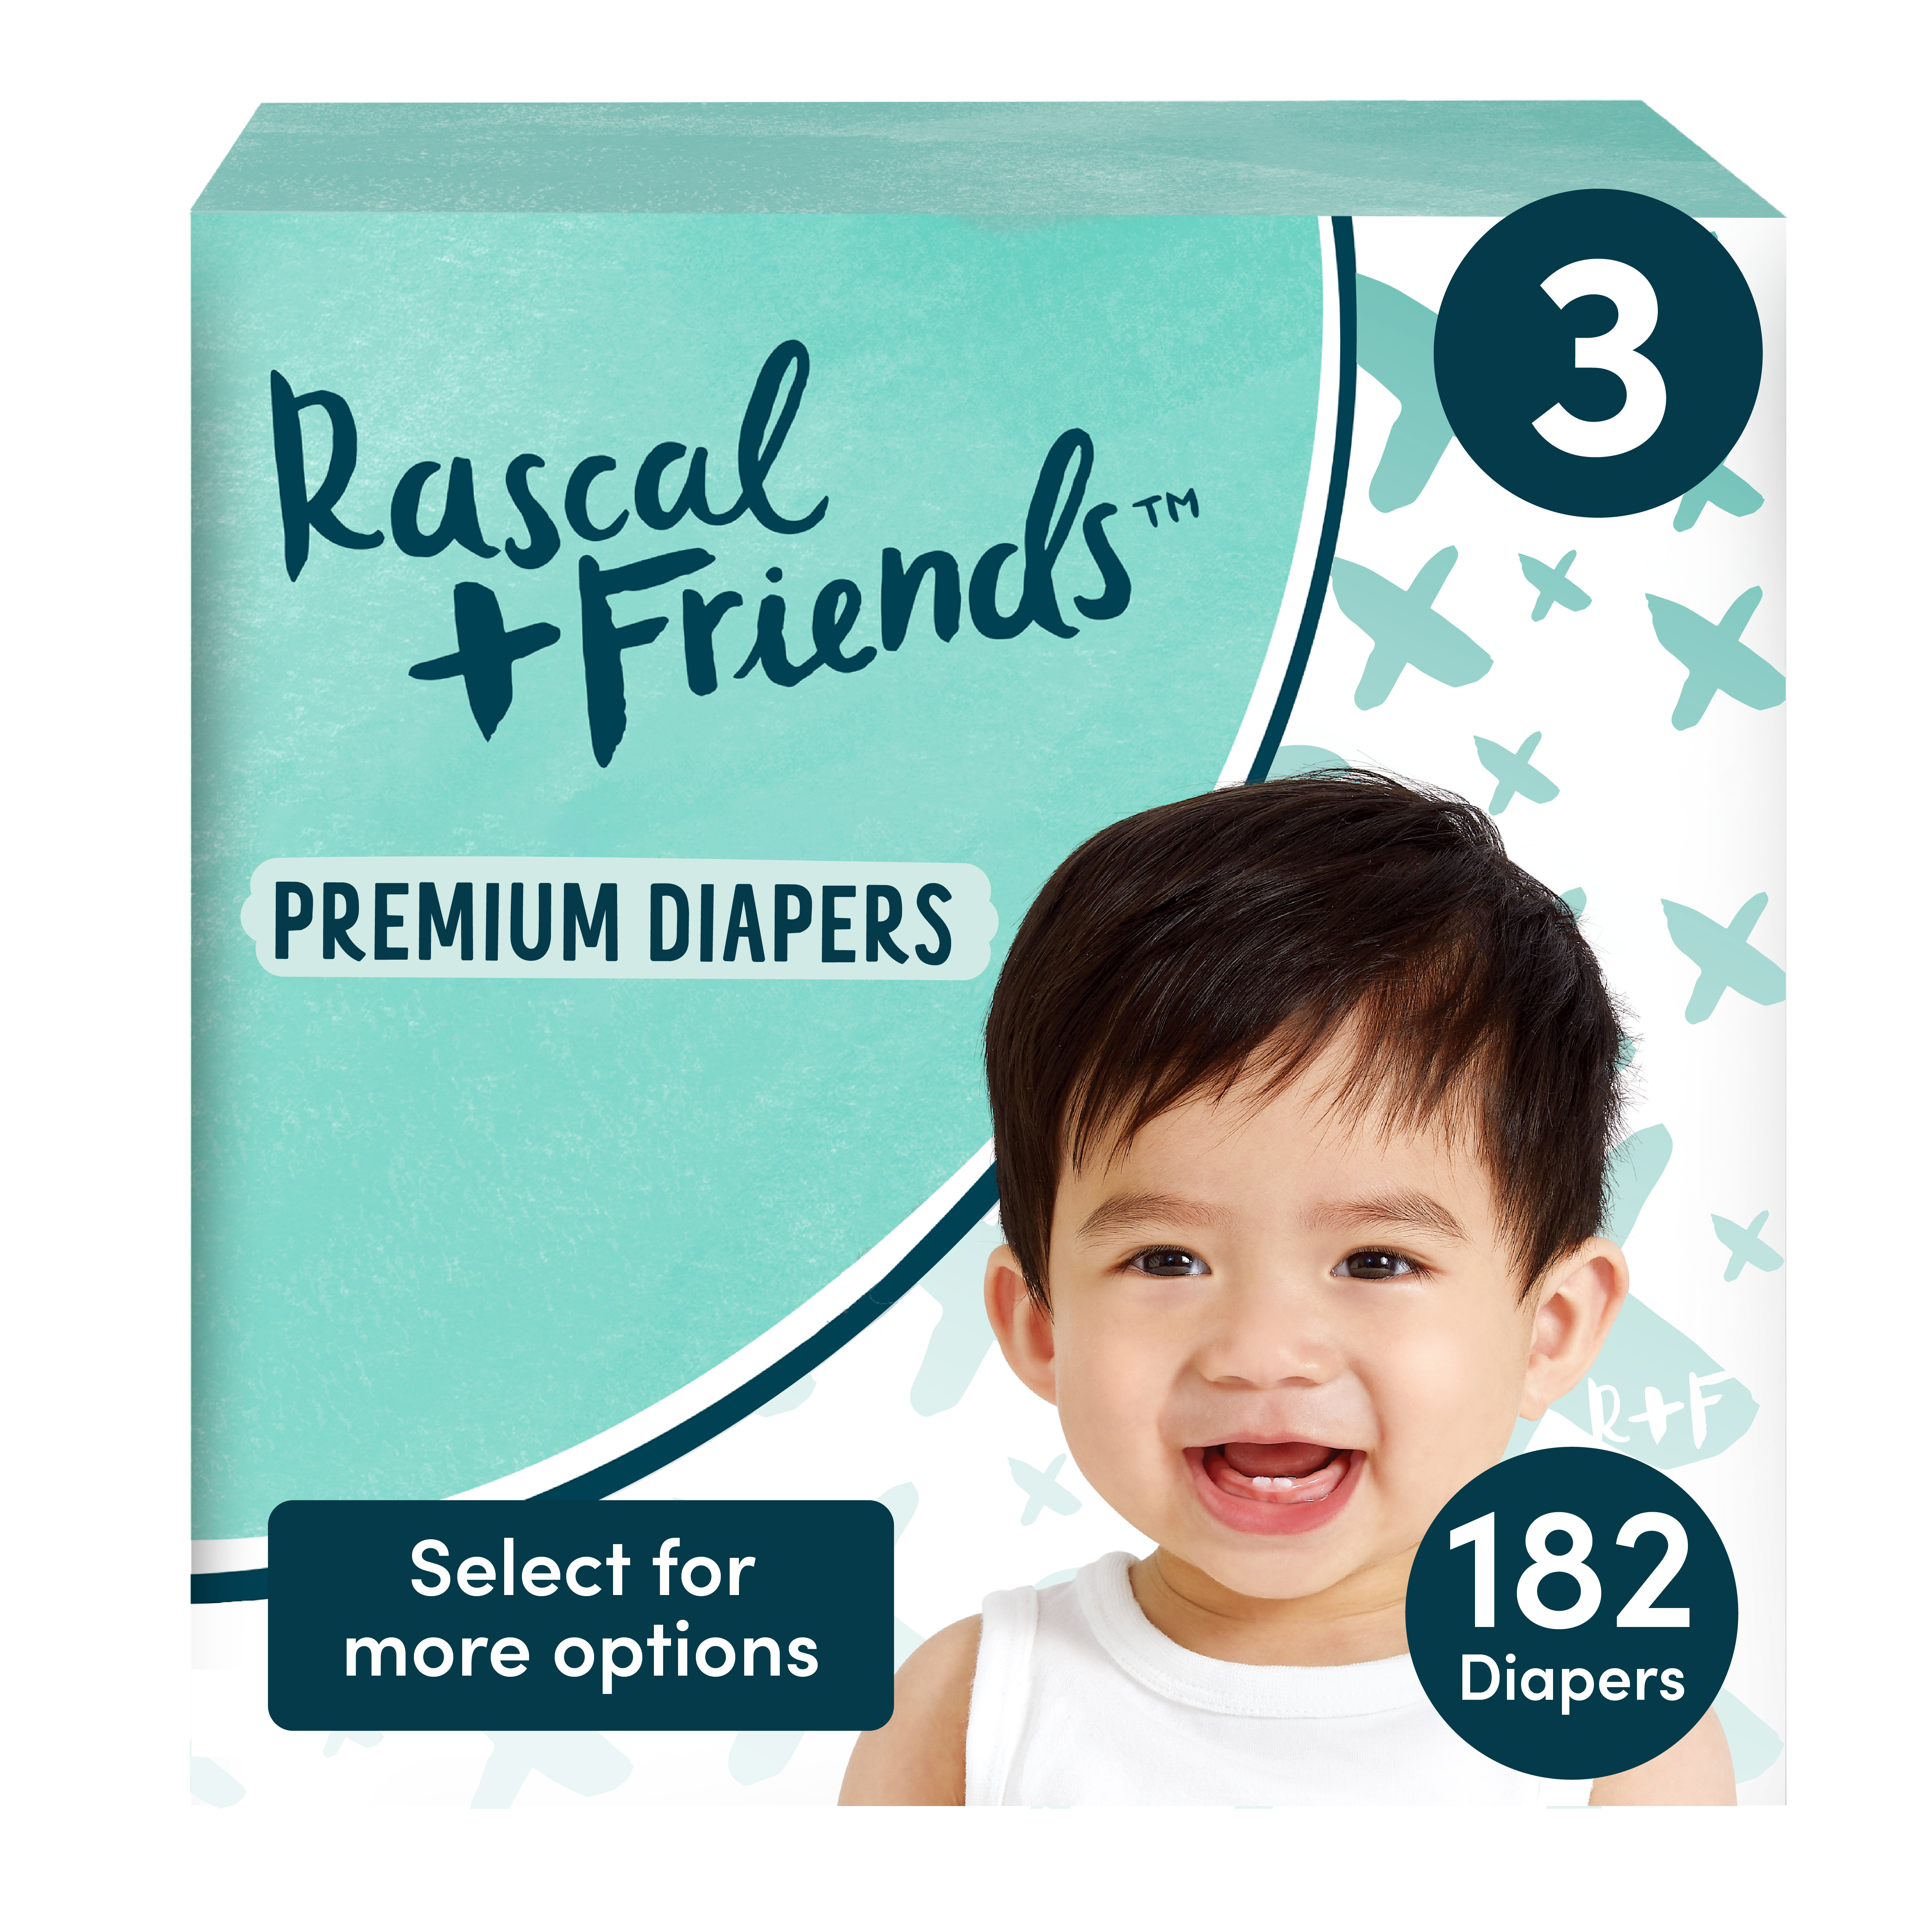 Rascal + Friends Premium Diapers Size 3, 182 Count (Select for More Options) - image 1 of 11